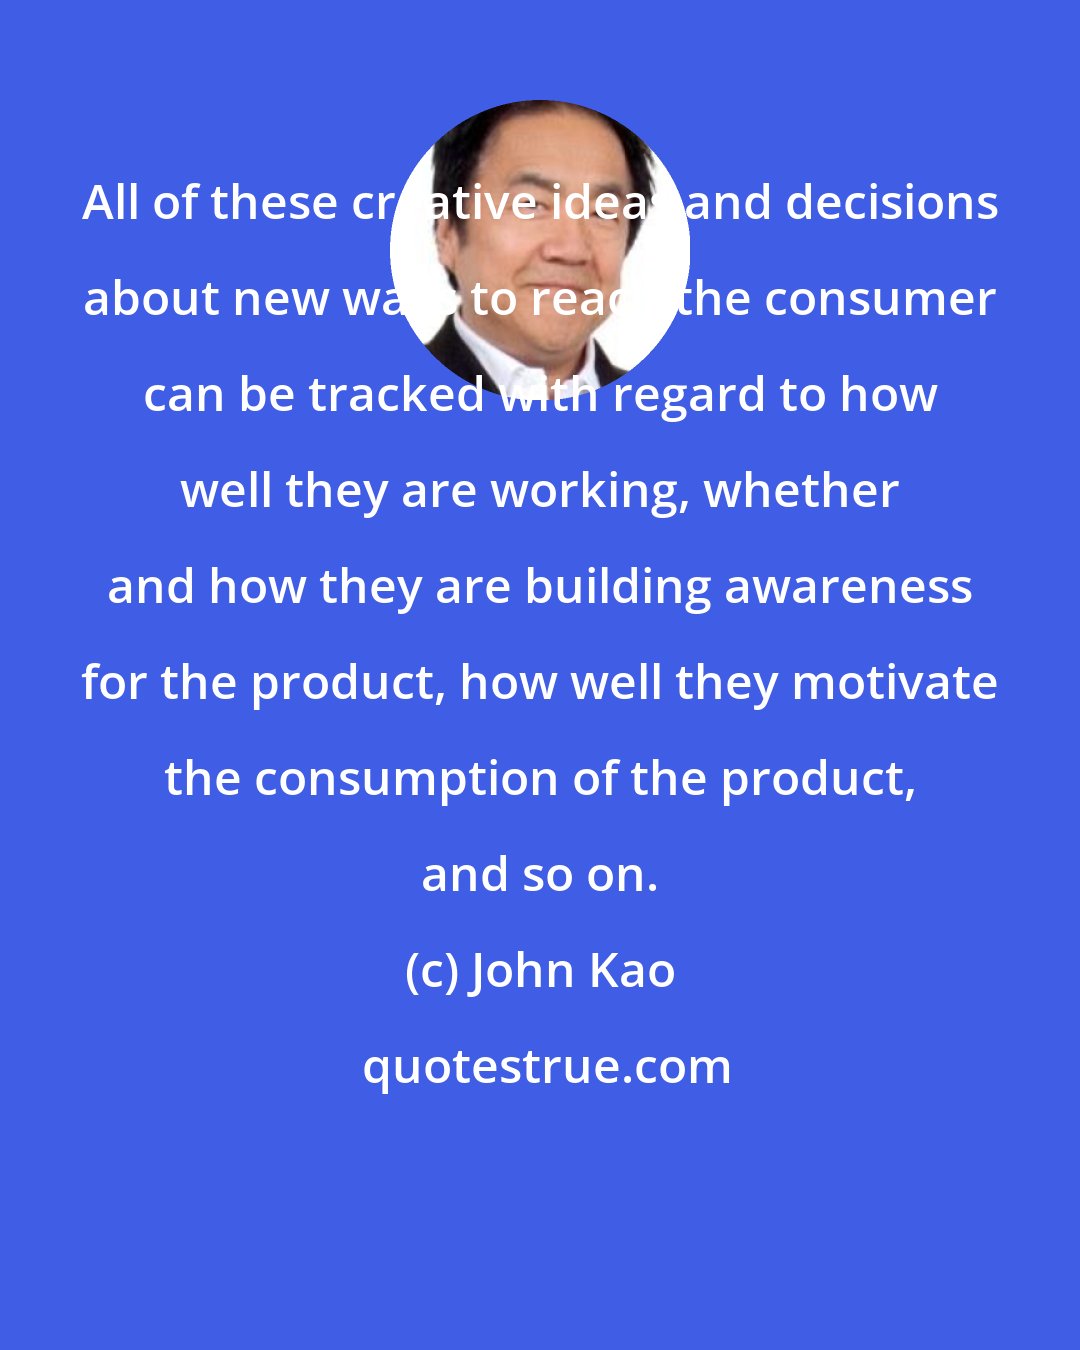 John Kao: All of these creative ideas and decisions about new ways to reach the consumer can be tracked with regard to how well they are working, whether and how they are building awareness for the product, how well they motivate the consumption of the product, and so on.